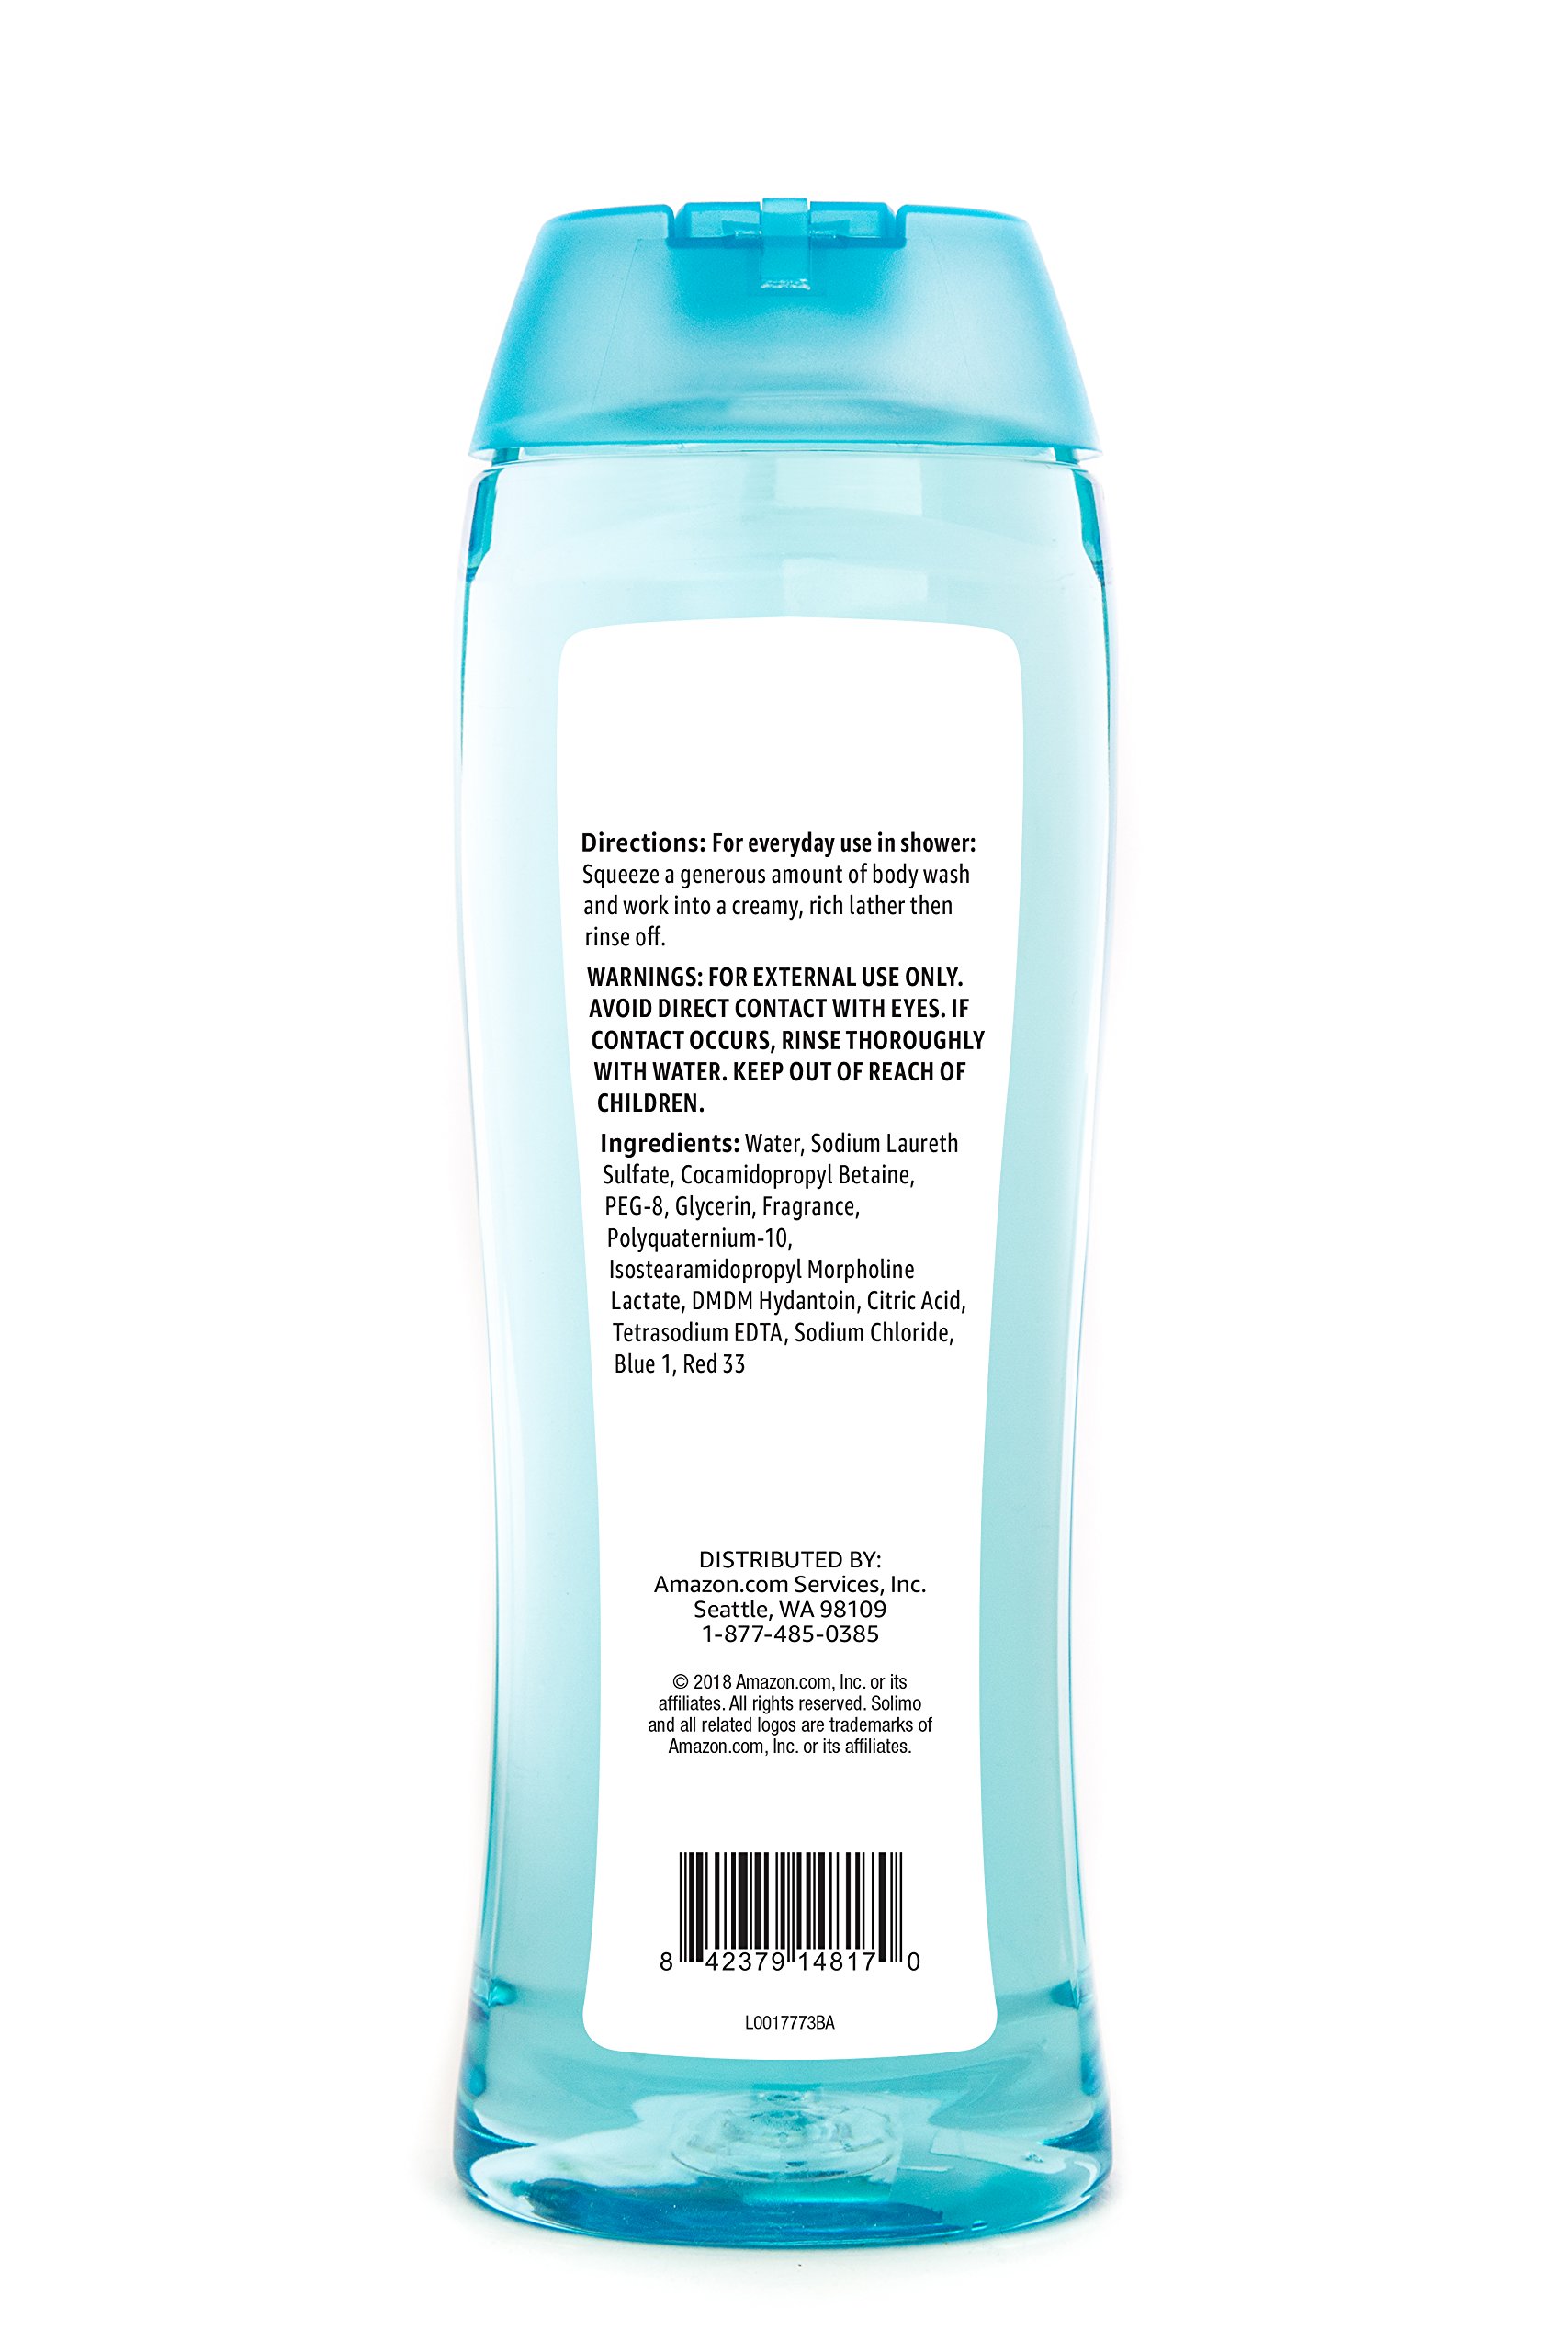 Amazon Brand - Solimo Body Wash, Cool Mist Scent, 21 Fl Oz (Pack of 4)